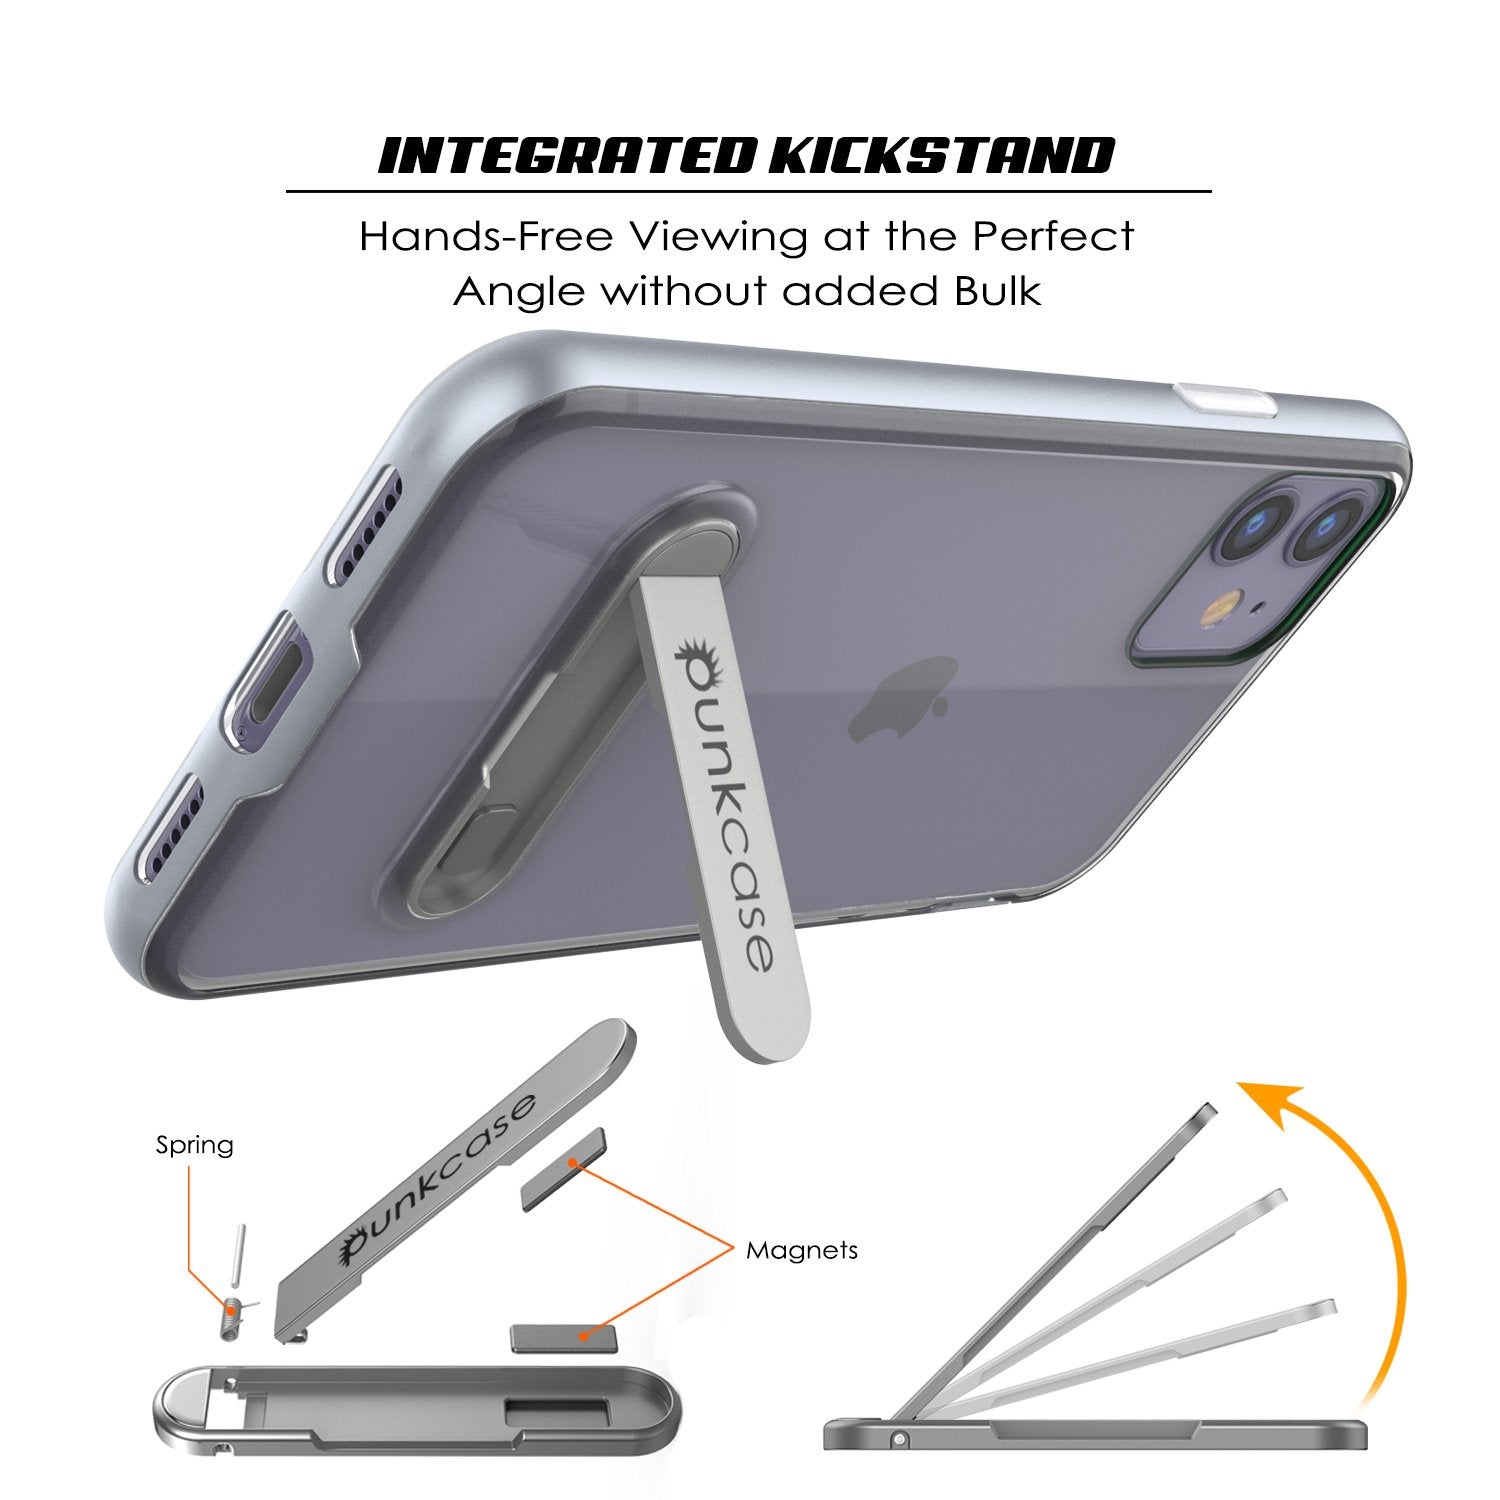 iPhone 12 Case, PUNKcase [LUCID 3.0 Series] [Slim Fit] Protective Cover w/ Integrated Screen Protector [Silver]